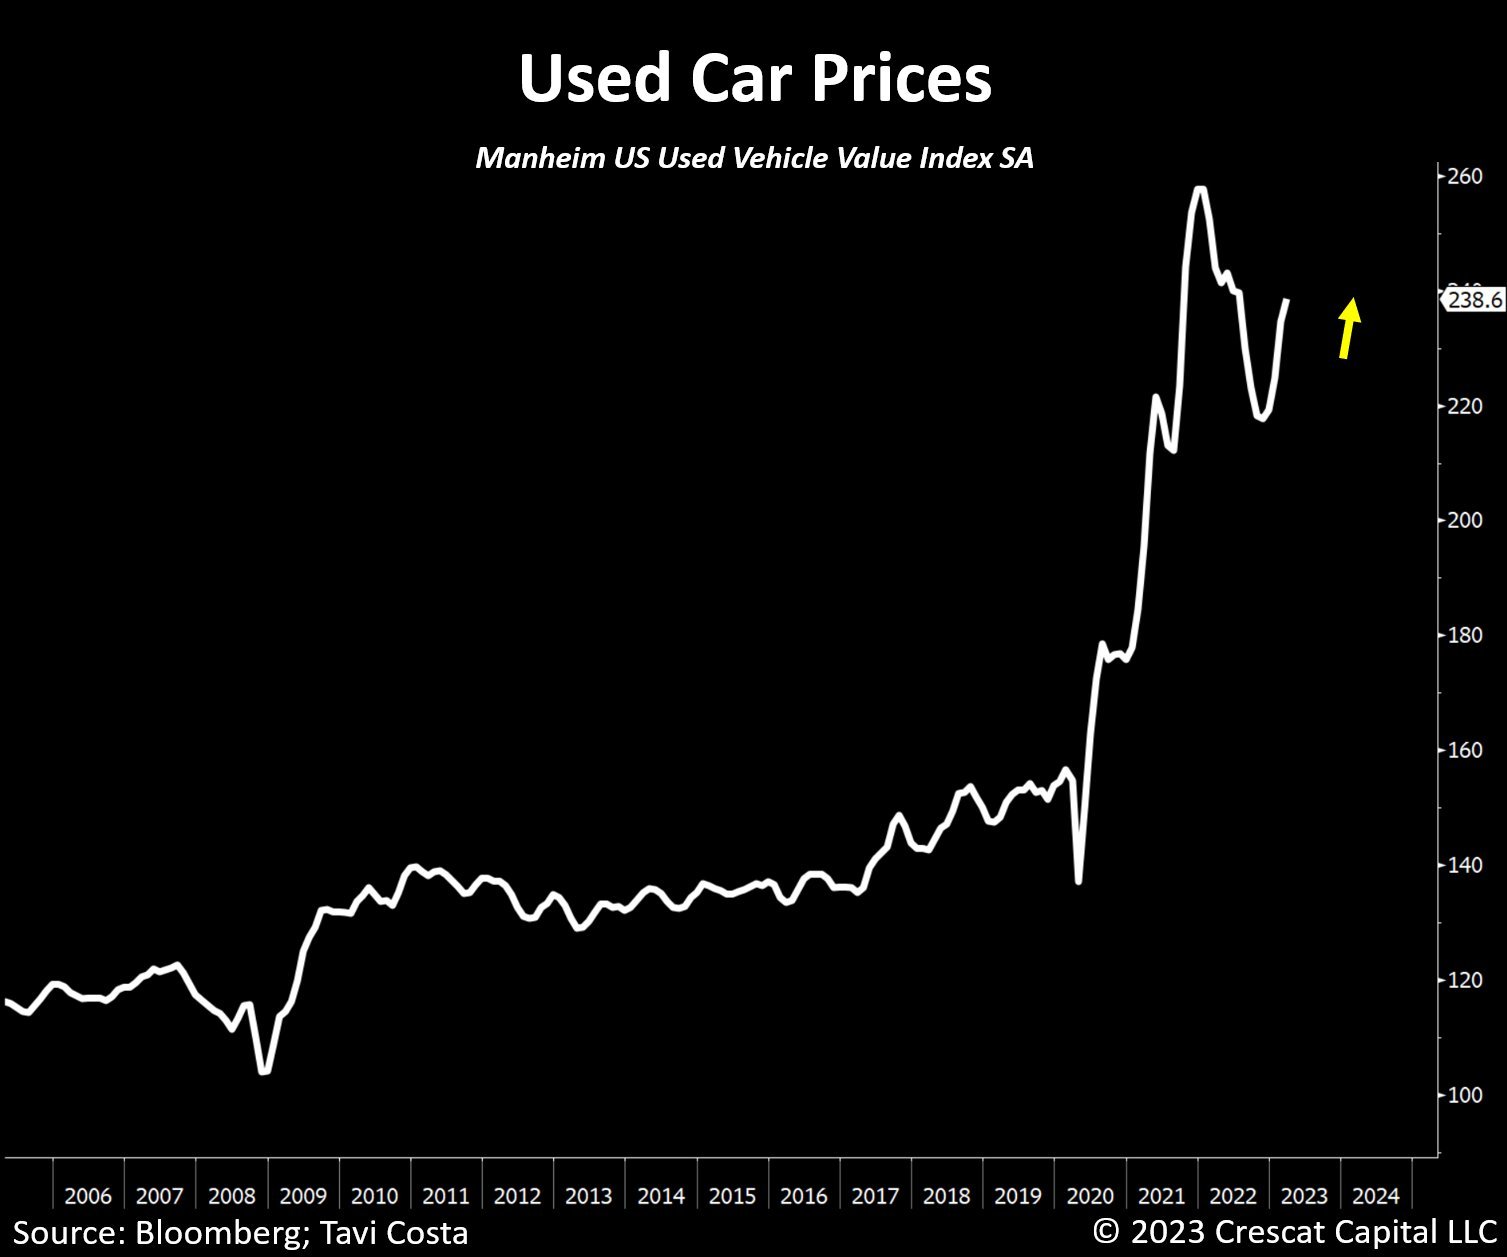 Used car prices increased again for the 5th month in a row